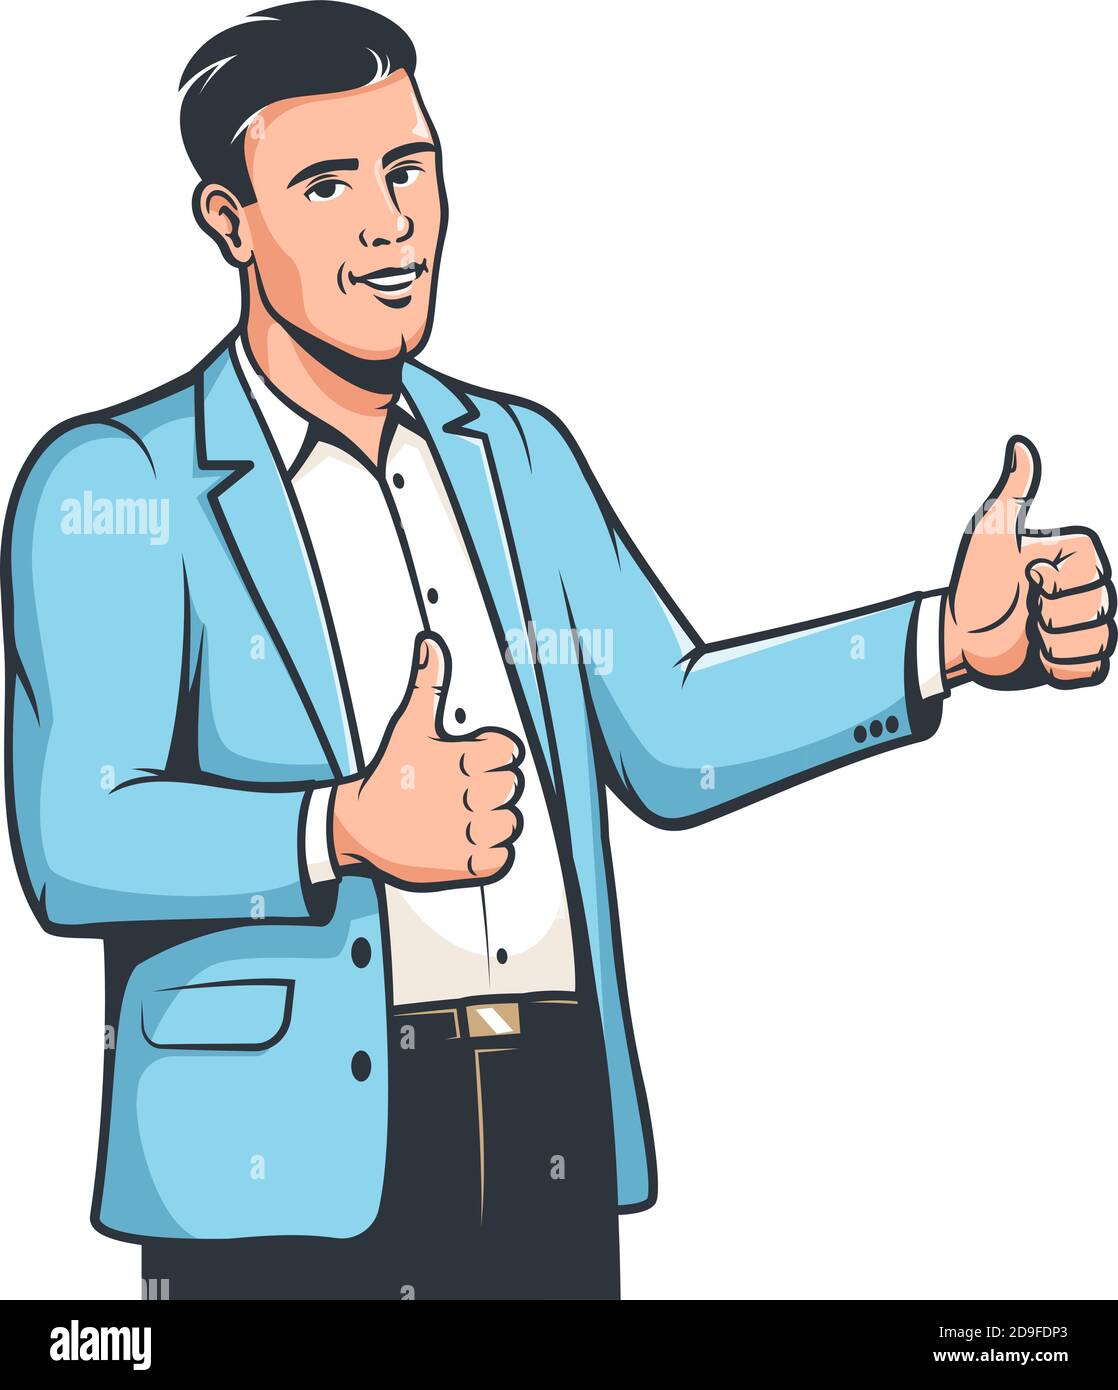 Stylish Man in suit thumb up. Like sign - hand gesture Stock Vector